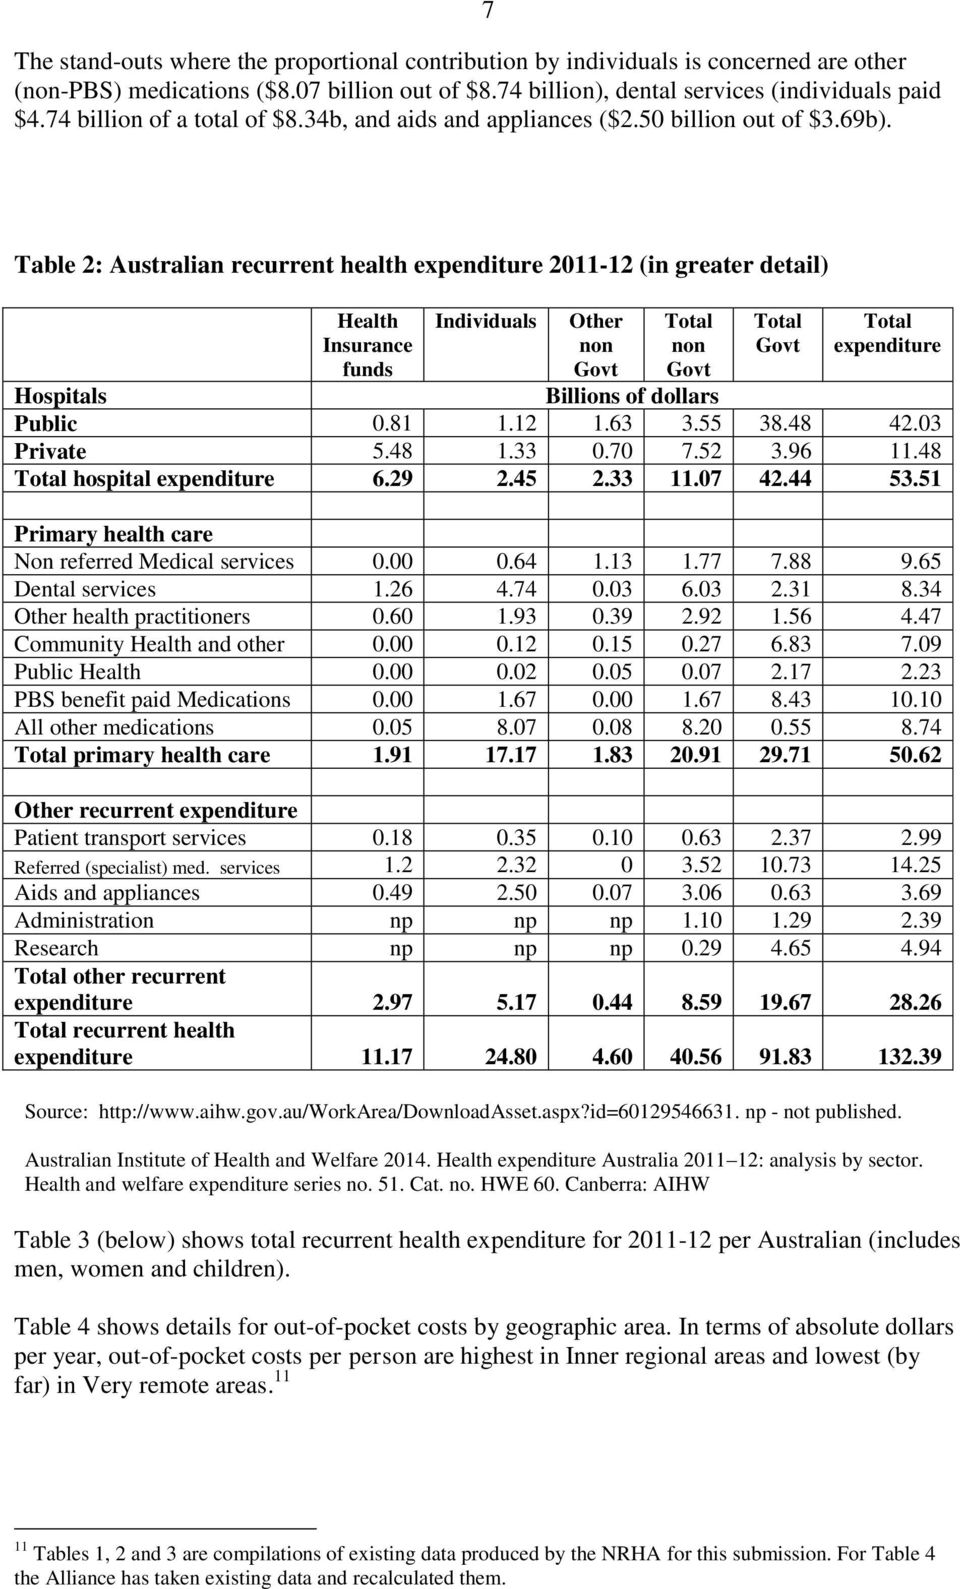 7 Table 2: Australian recurrent health expenditure 2011-12 (in greater detail) Health Insurance funds Individuals Other non Govt Total non Govt Total Govt Total expenditure Hospitals Billions of